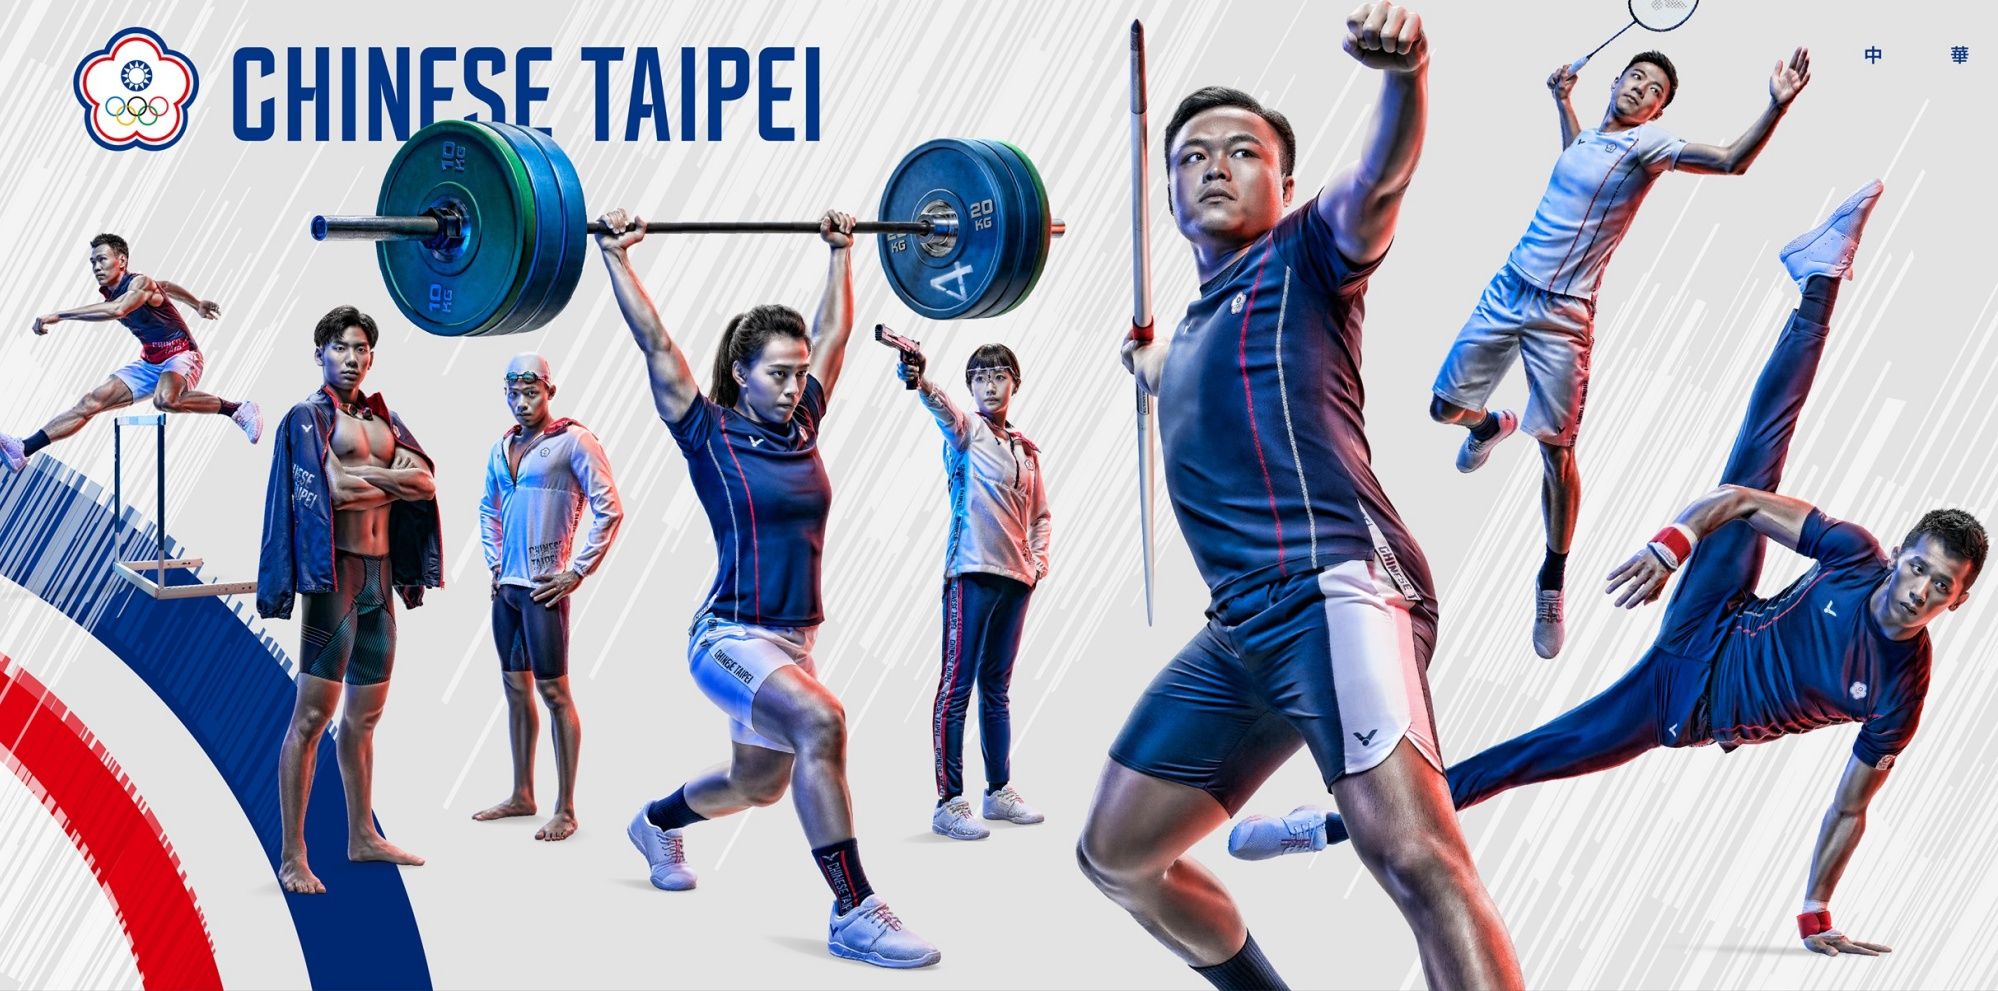 Team Chinese Taipei won 2 golds, 4 silvers and 6 bronzes in this Olympics. Photo/courtesy of the Sports Administration